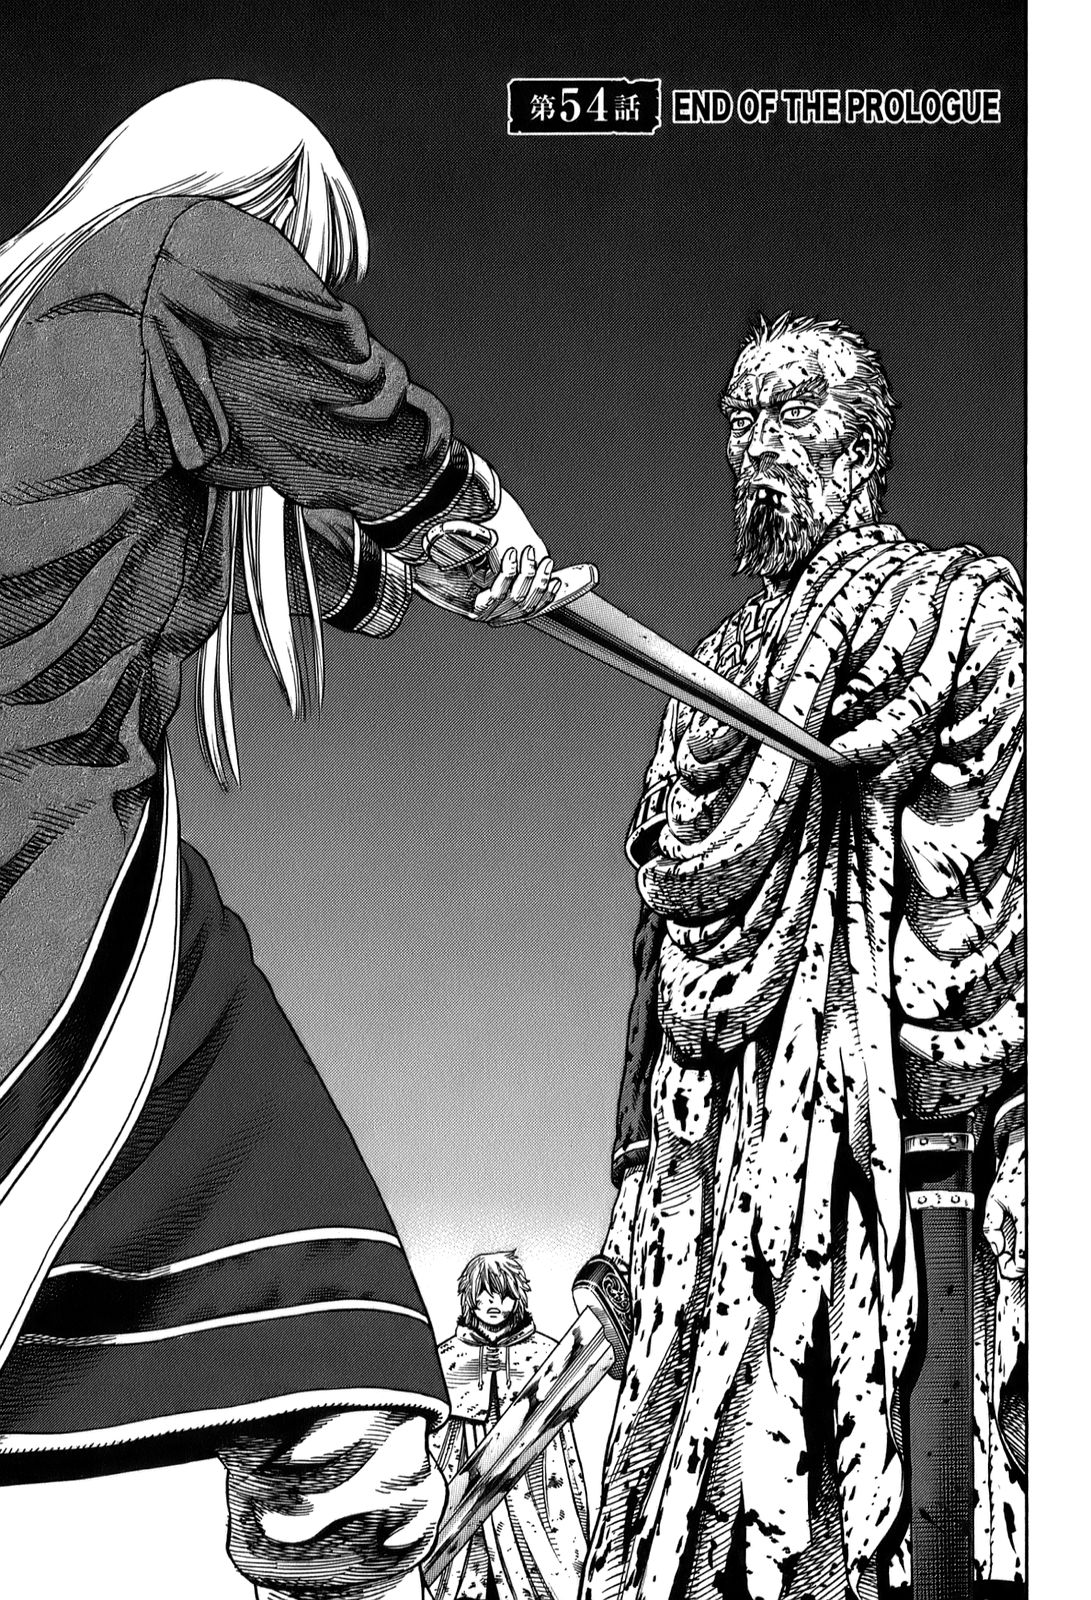 What chapter does Vinland Saga end on? Explained